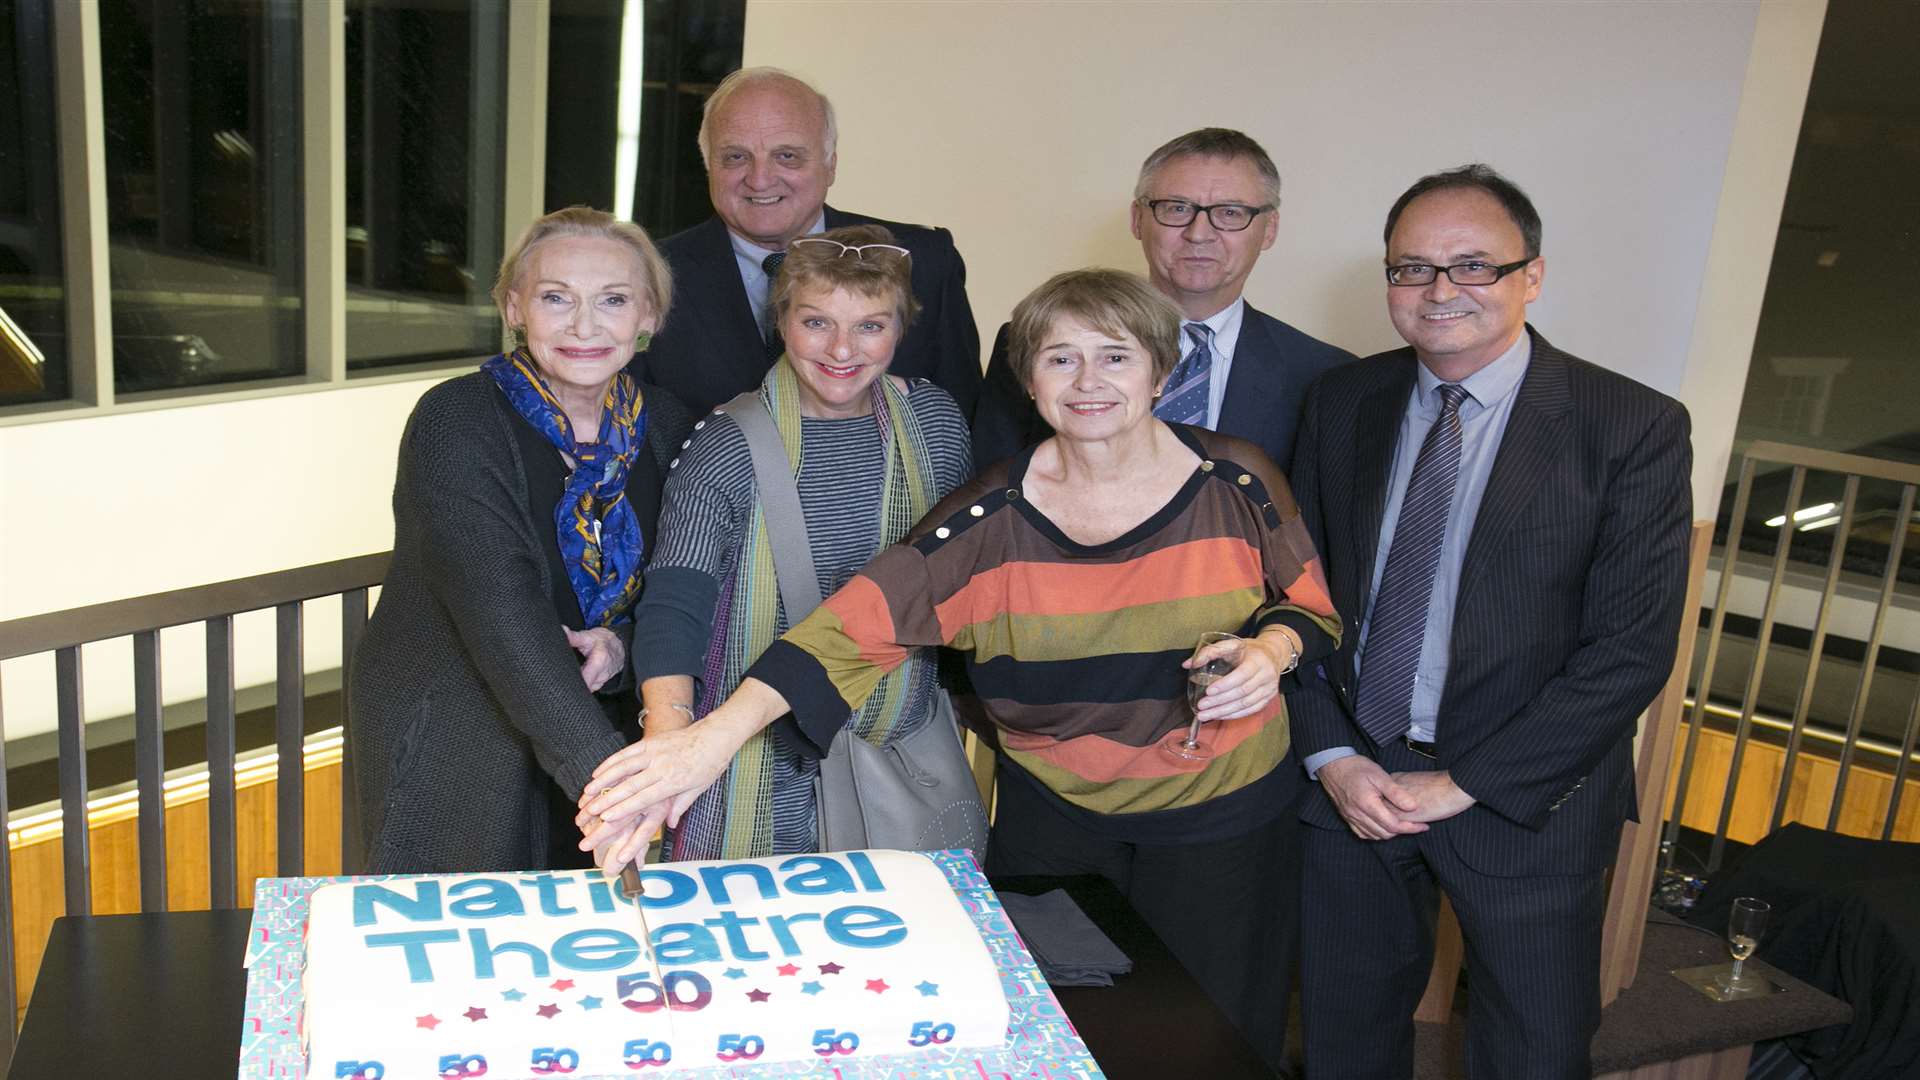 Siân Phillips, Selina Cadell, and Brigit Forsyth, with Canterbury city council leader John Gilbey, Marlowe Theatre director Mark Everett and National Theatre executive director Nick Starr